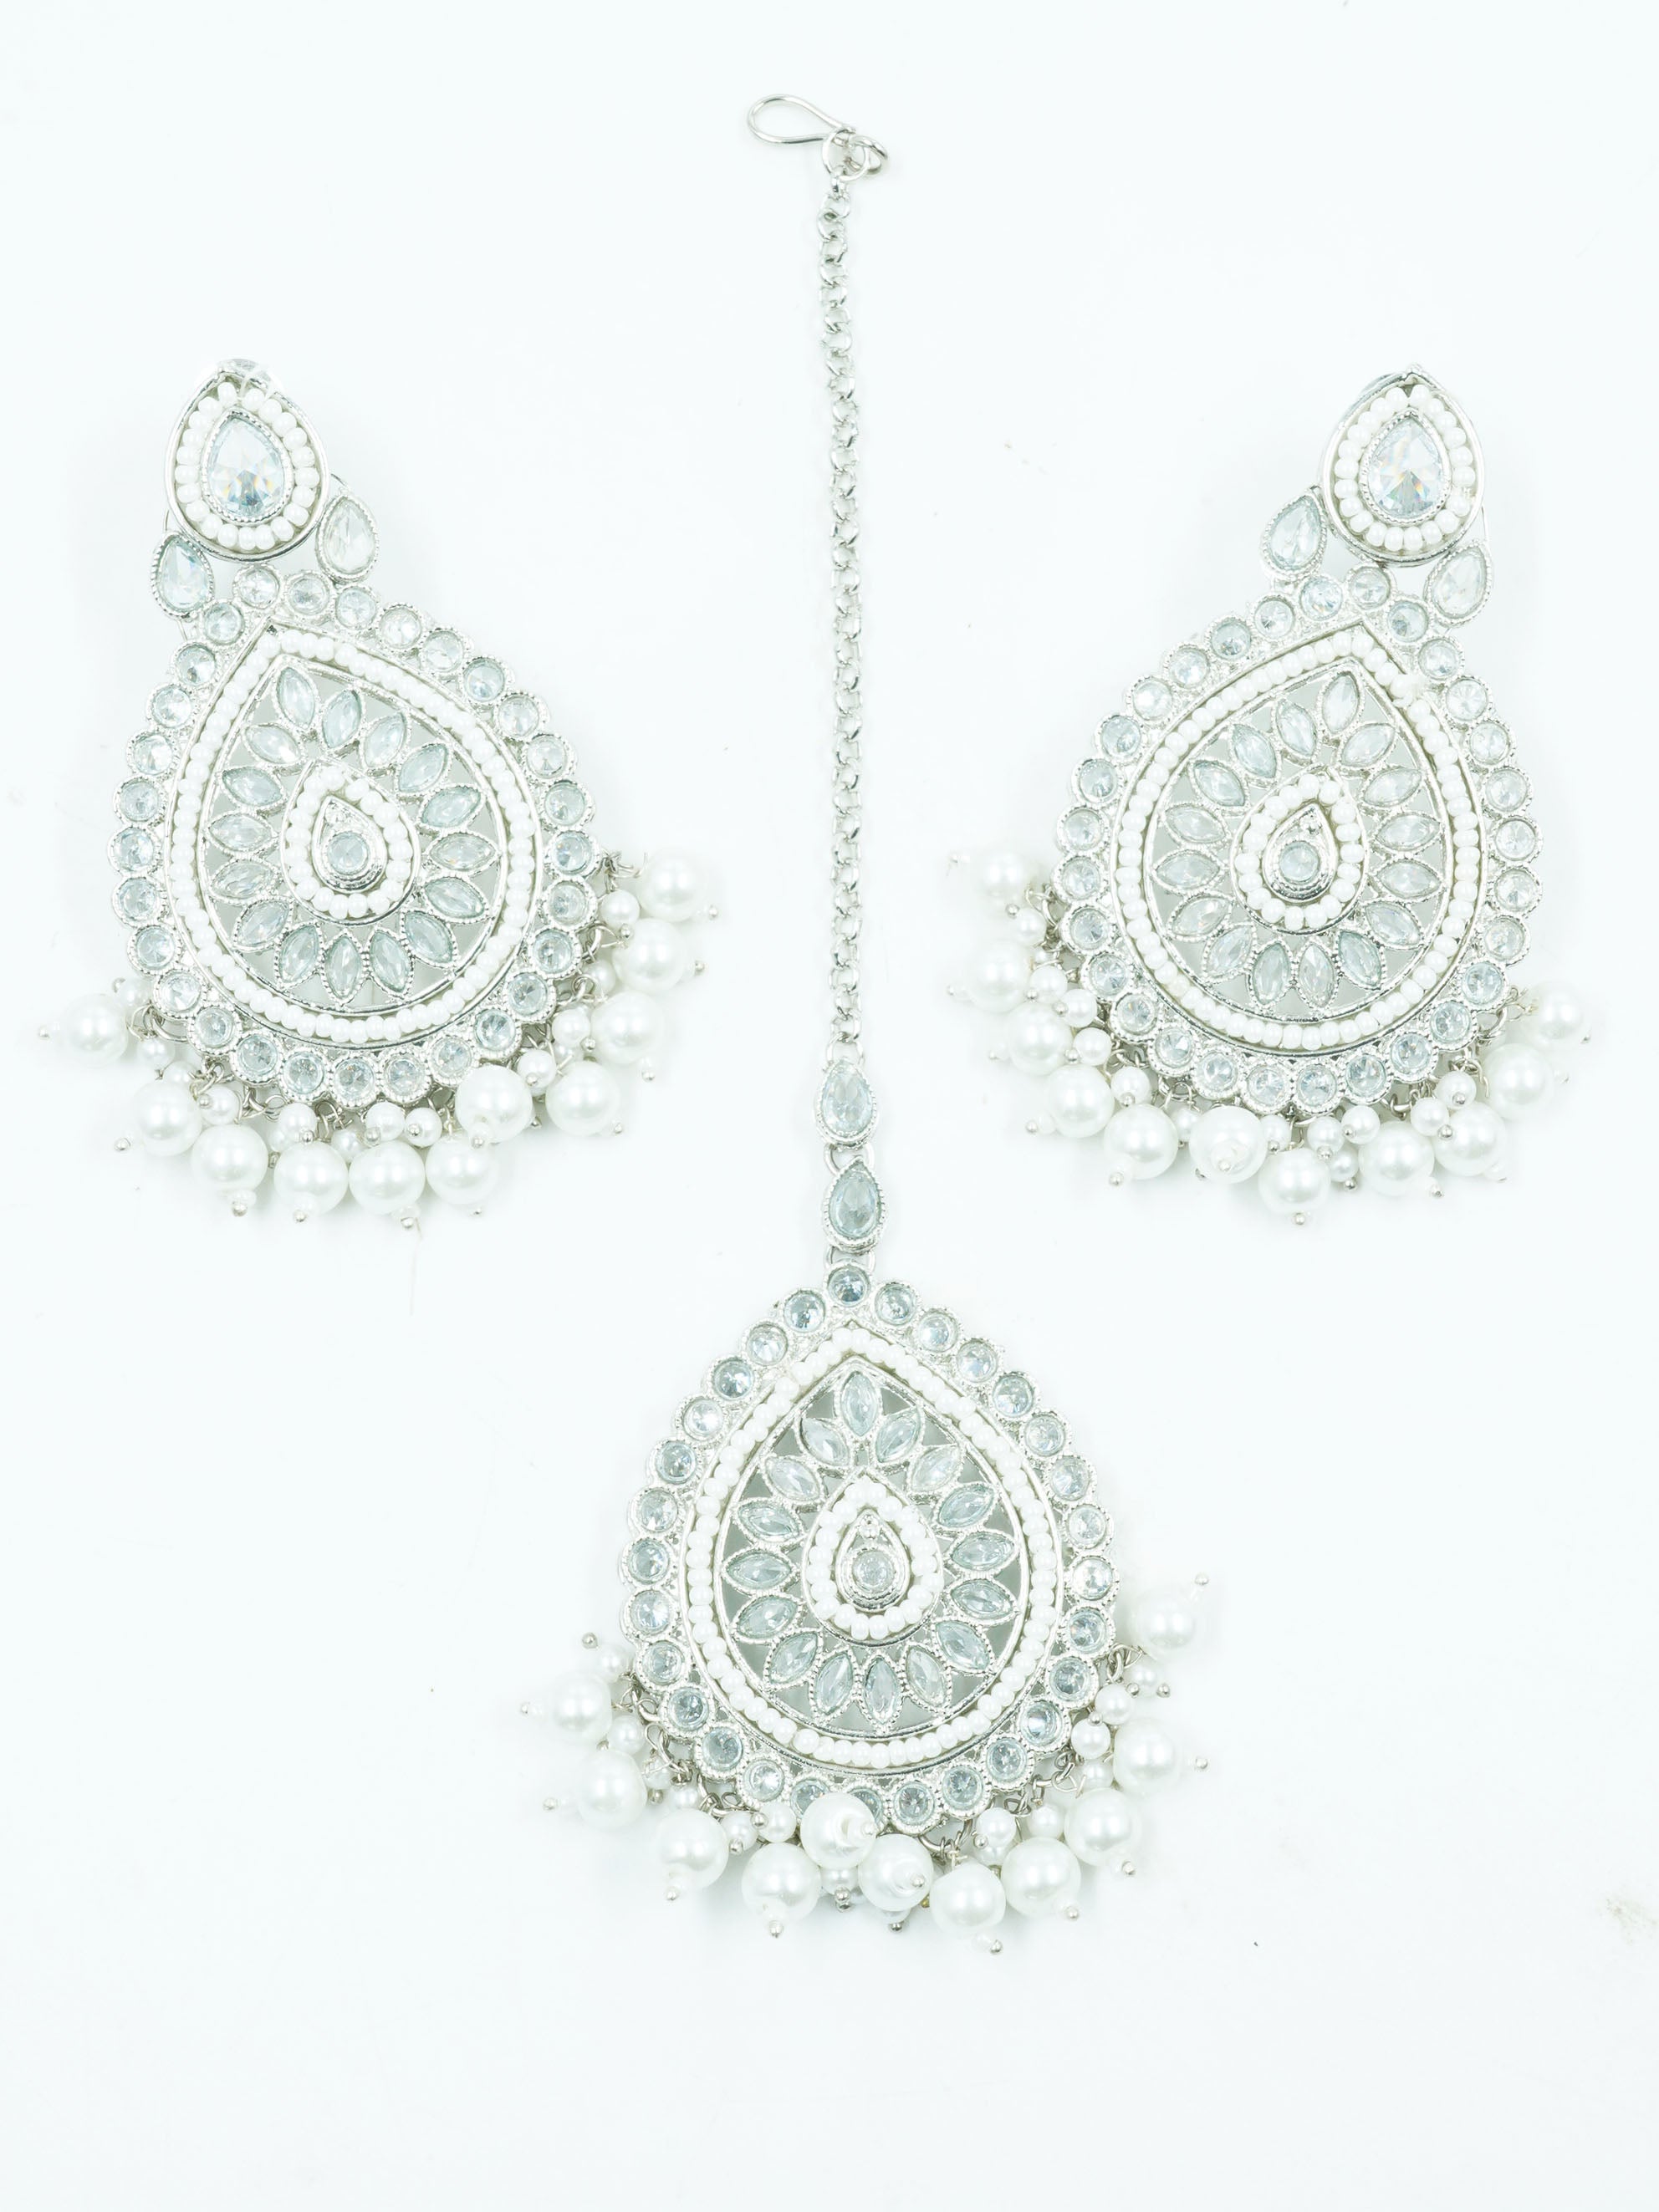 Silver finish Earring/jhumka/Dangler studded with Mirror Stones with Mang Tikka and Pearl Drops 11821N